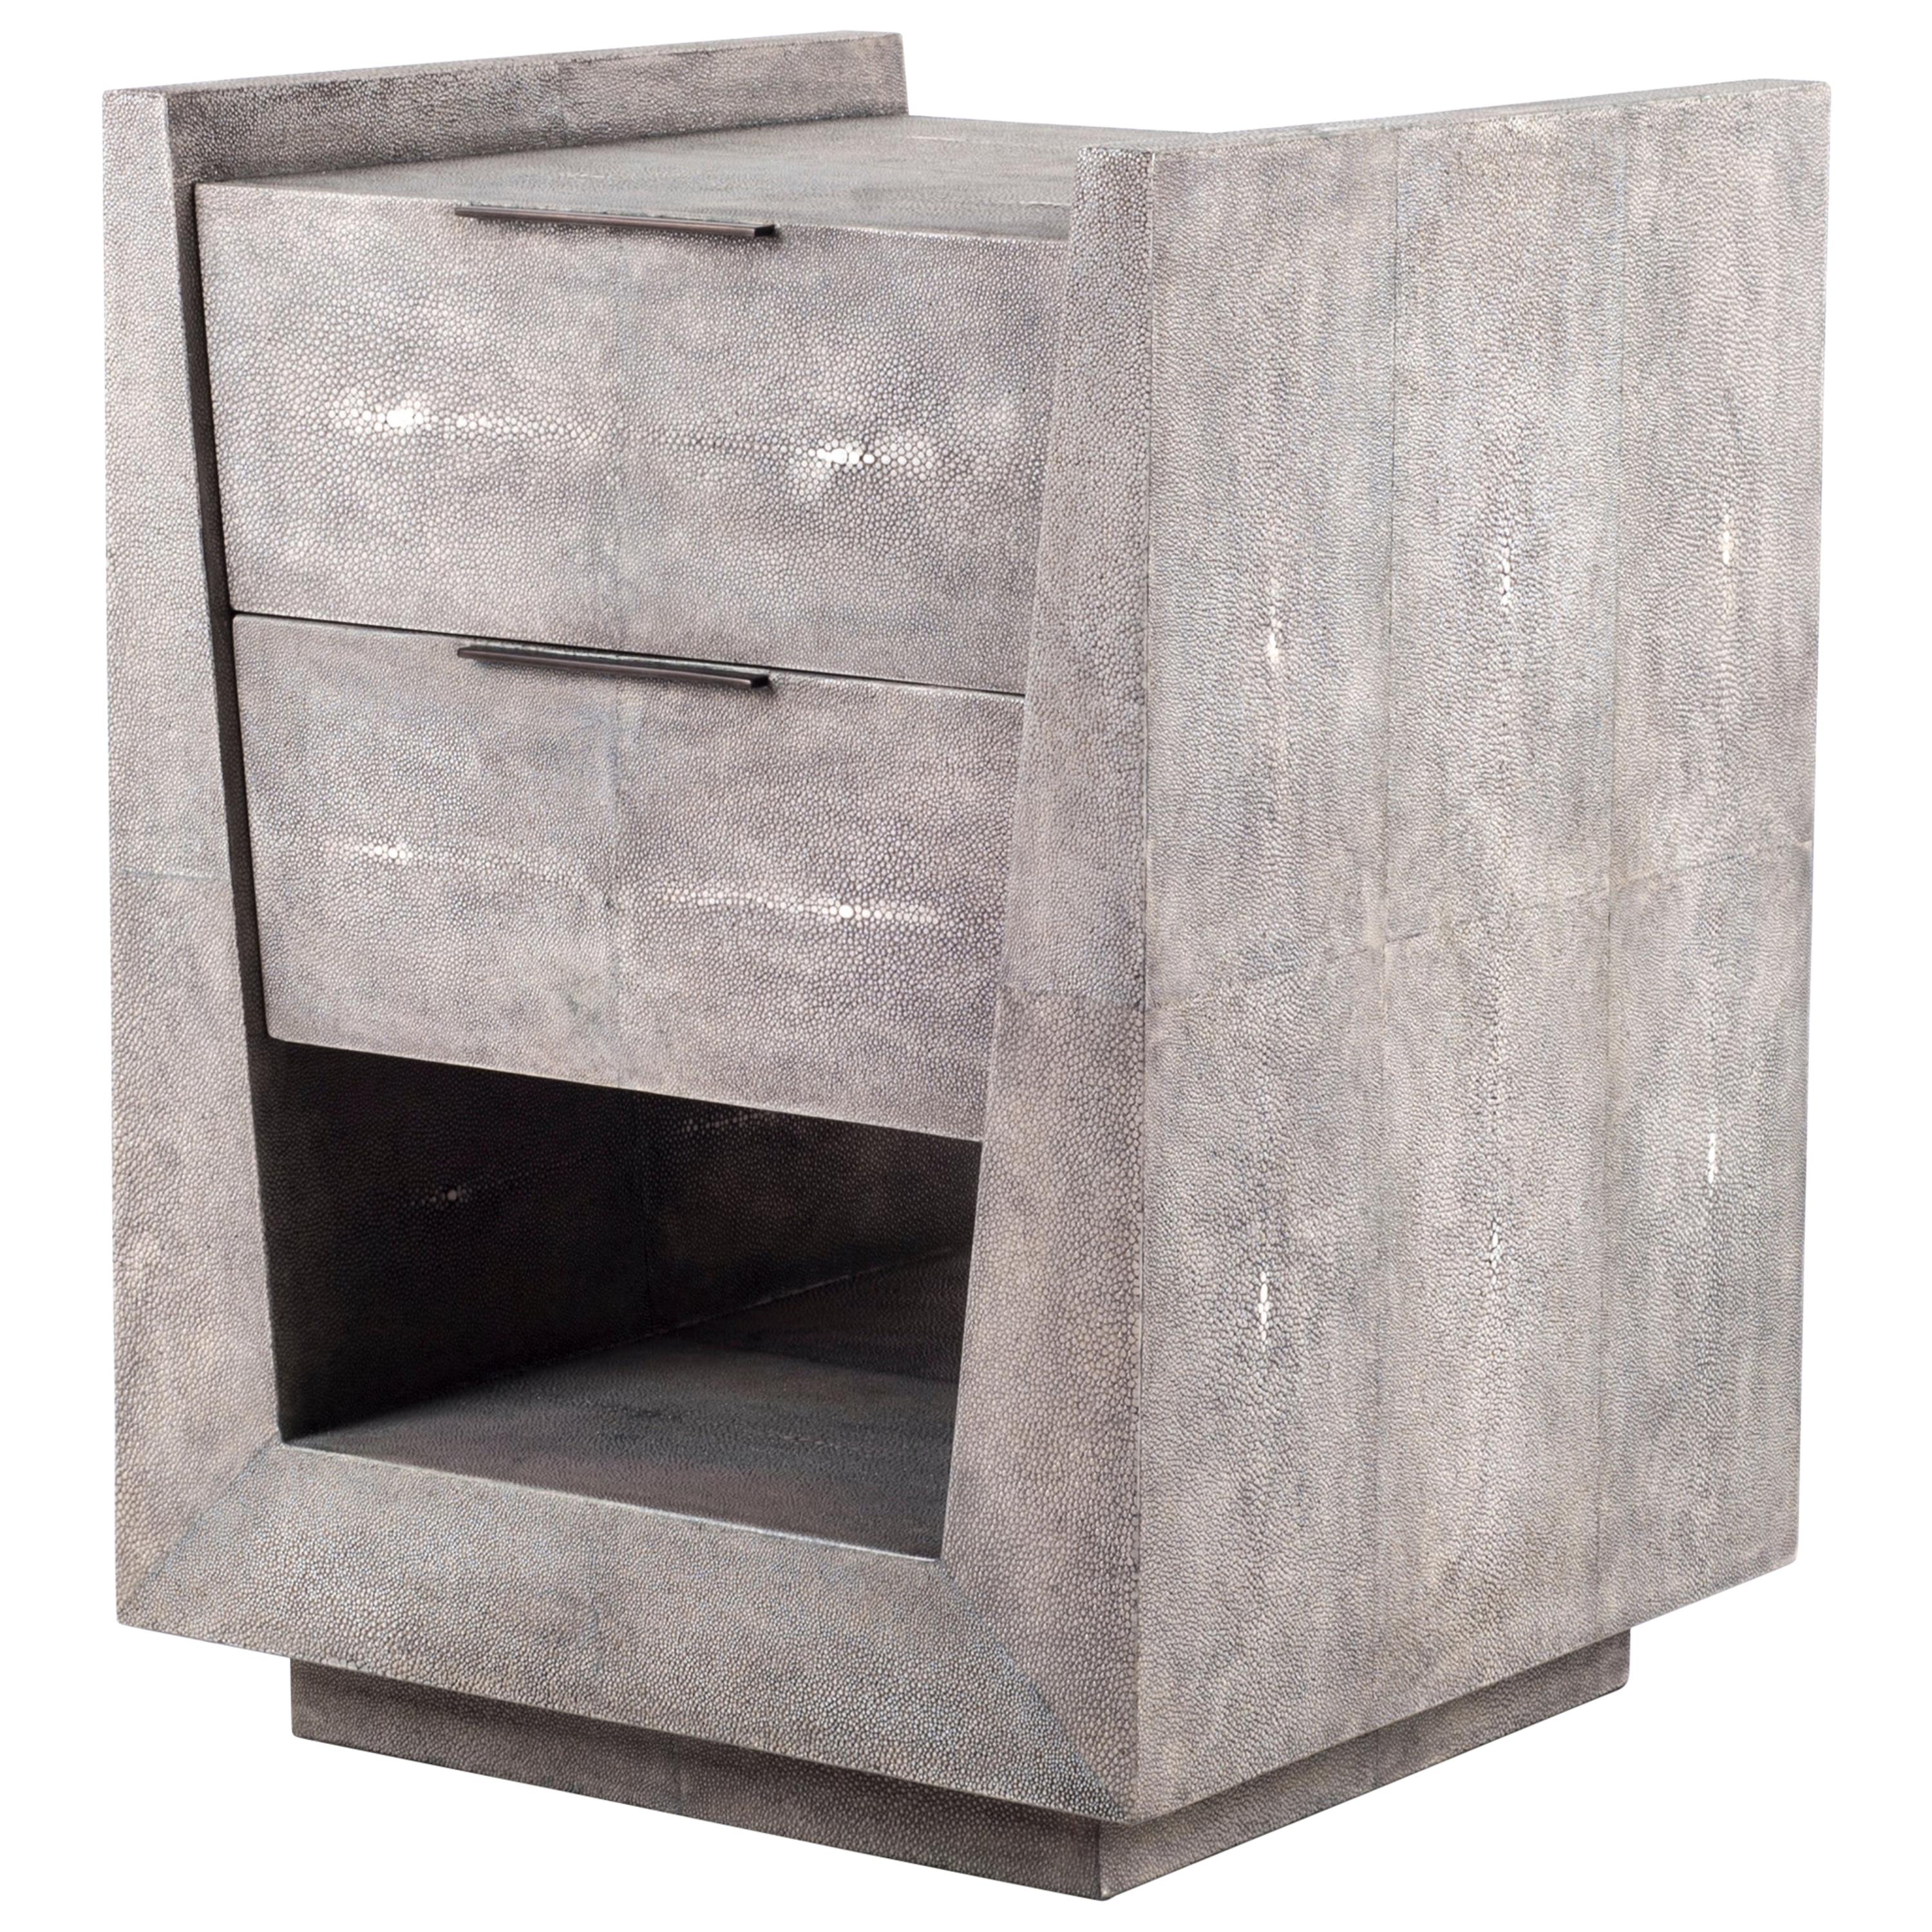 The Lola Bedside by R&Y Augousti is an elegant piece with its subtle geometry. This bedside table is completely inlaid in grey shagreen with discreet bronze-patina brass flat handles for the drawers. The drawers are inlaid in gemelina wood. This